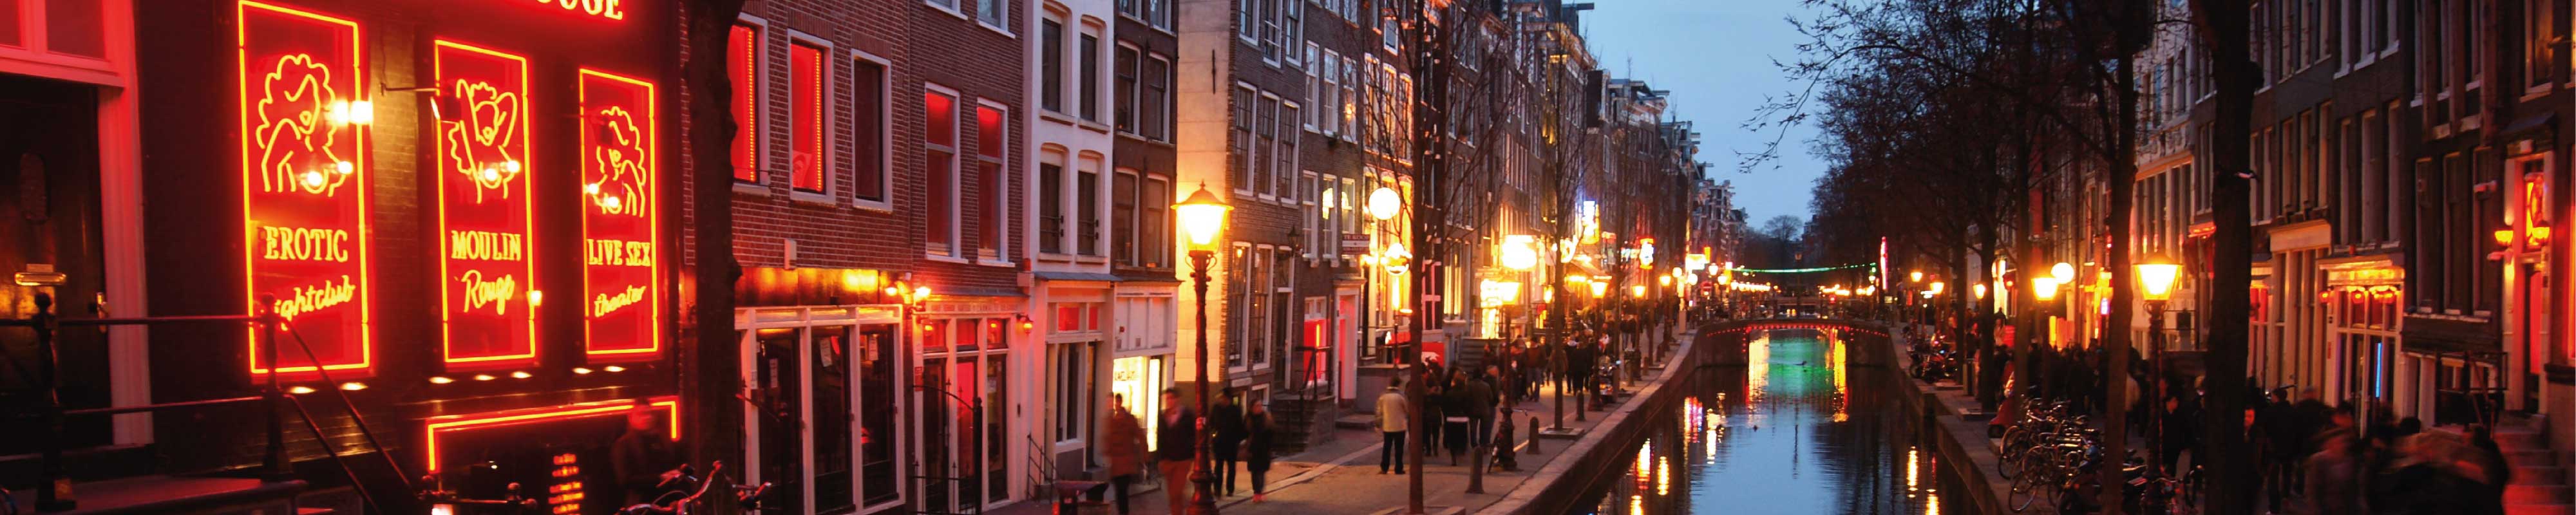 Luggage Storage | The Red Light District in Amsterdam - Nannybag